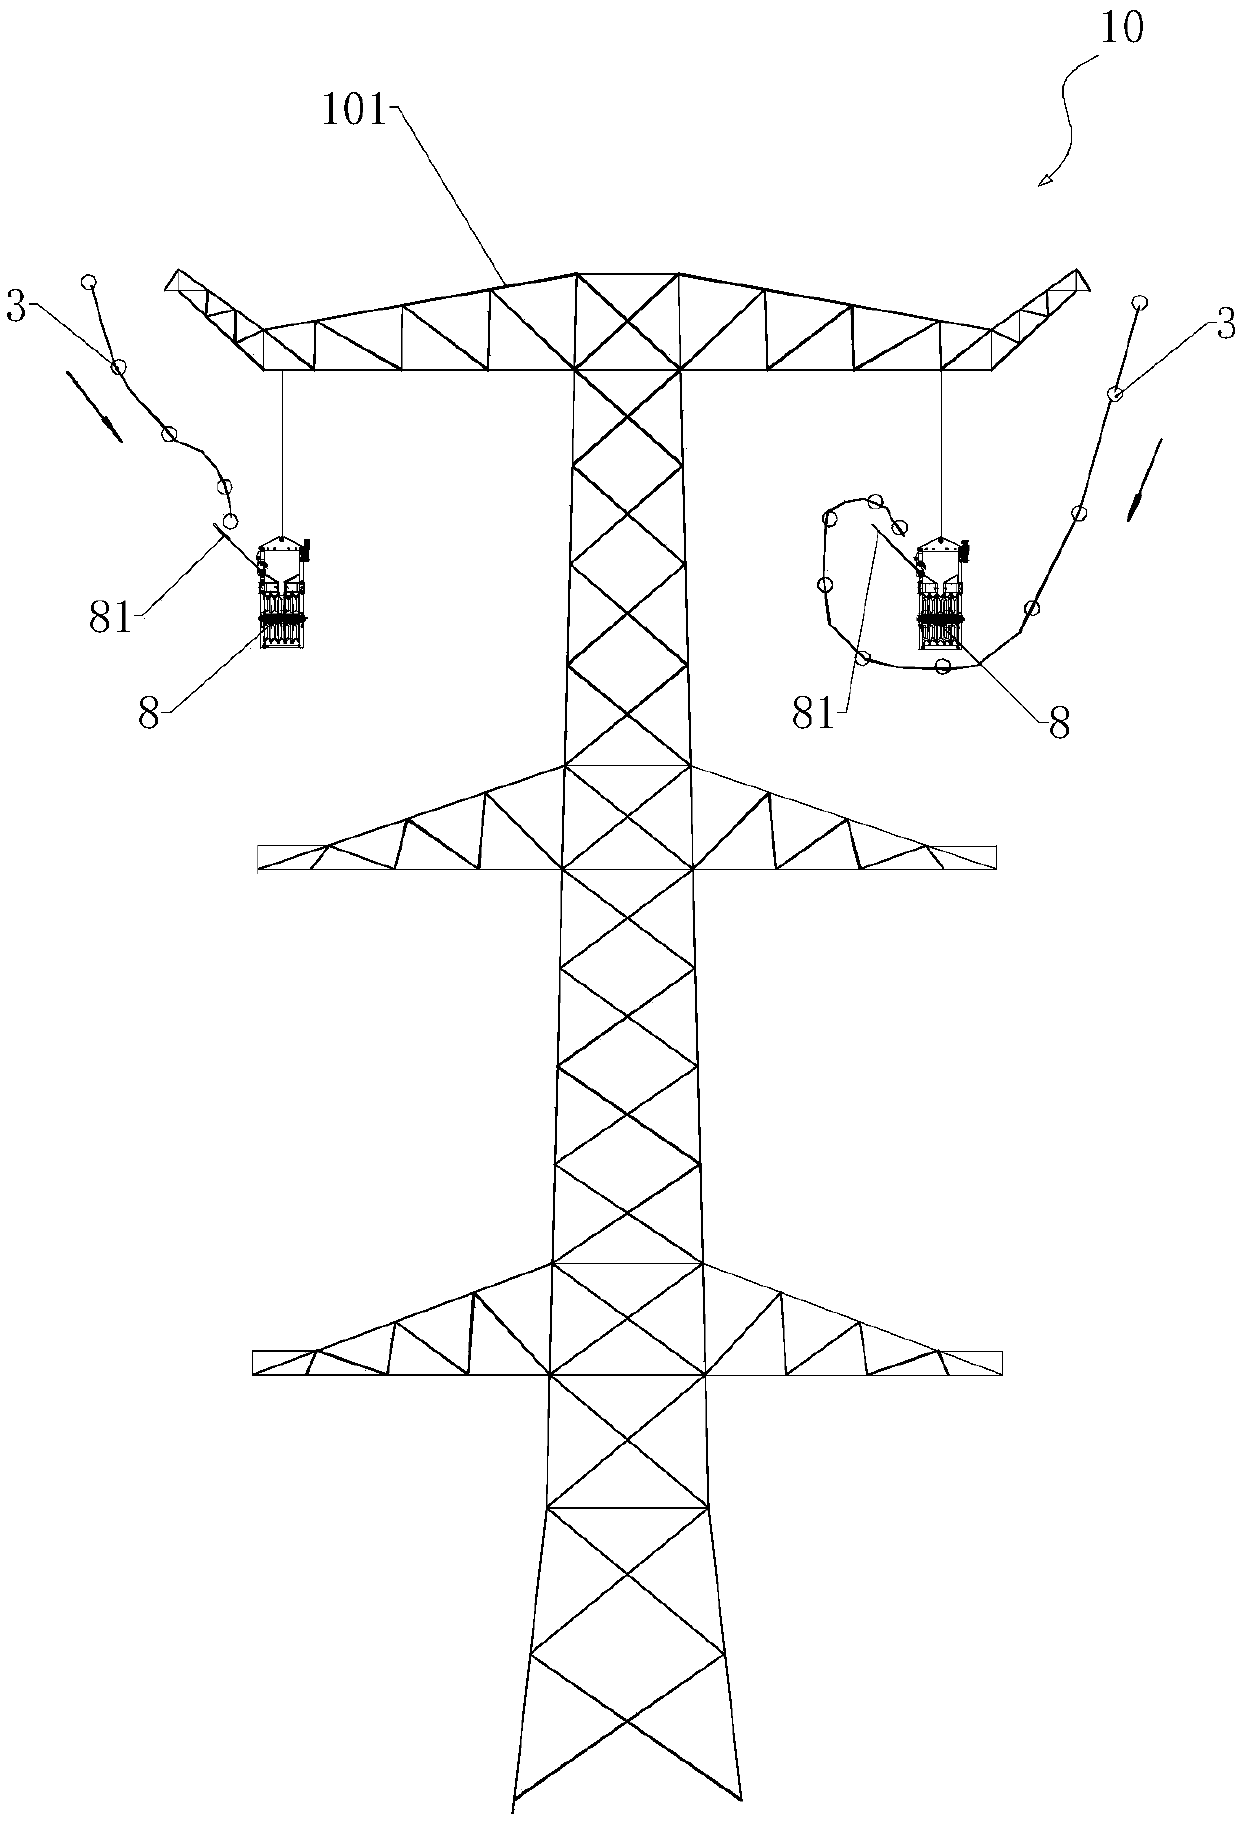 A method for a helicopter to deploy a guide rope